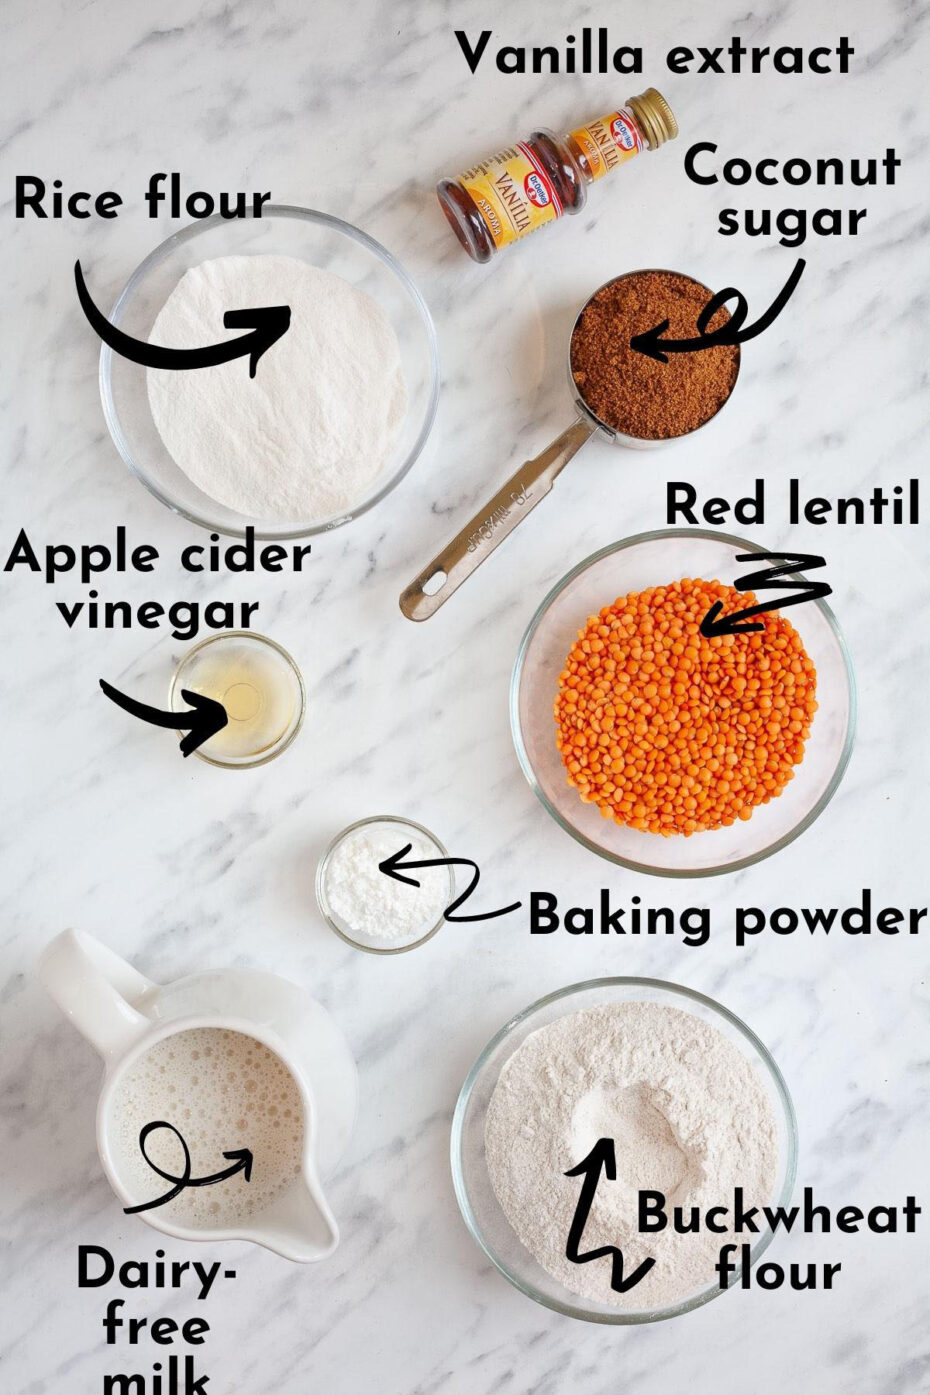 Ingredients for red lentil waffles measured in glass bowls, white flours, powders, brown coconut sugar, milk in a jar, vanilla extract and of course red lentils